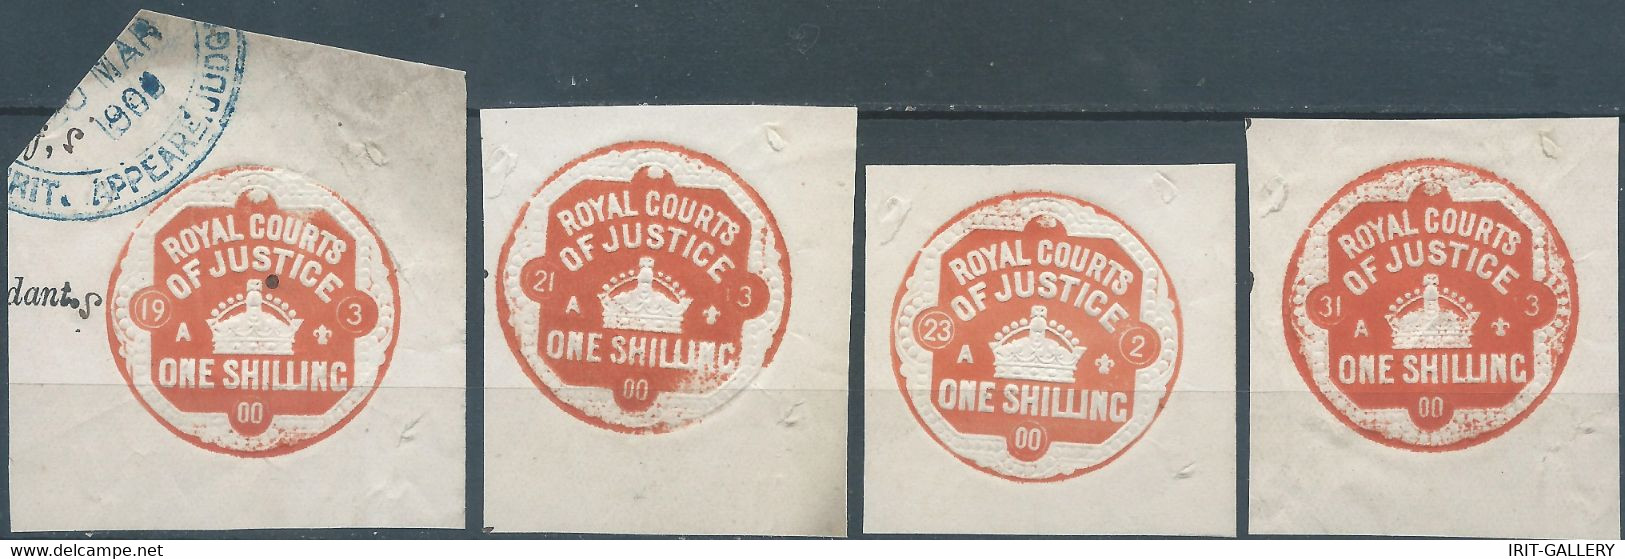 Great Britain-ENGLAND,1900 ,ROYAL COURTS OF JUSTICE, Tax Fee,Different Date Of The Day Of The Month,1 SHILLING - Revenue Stamps